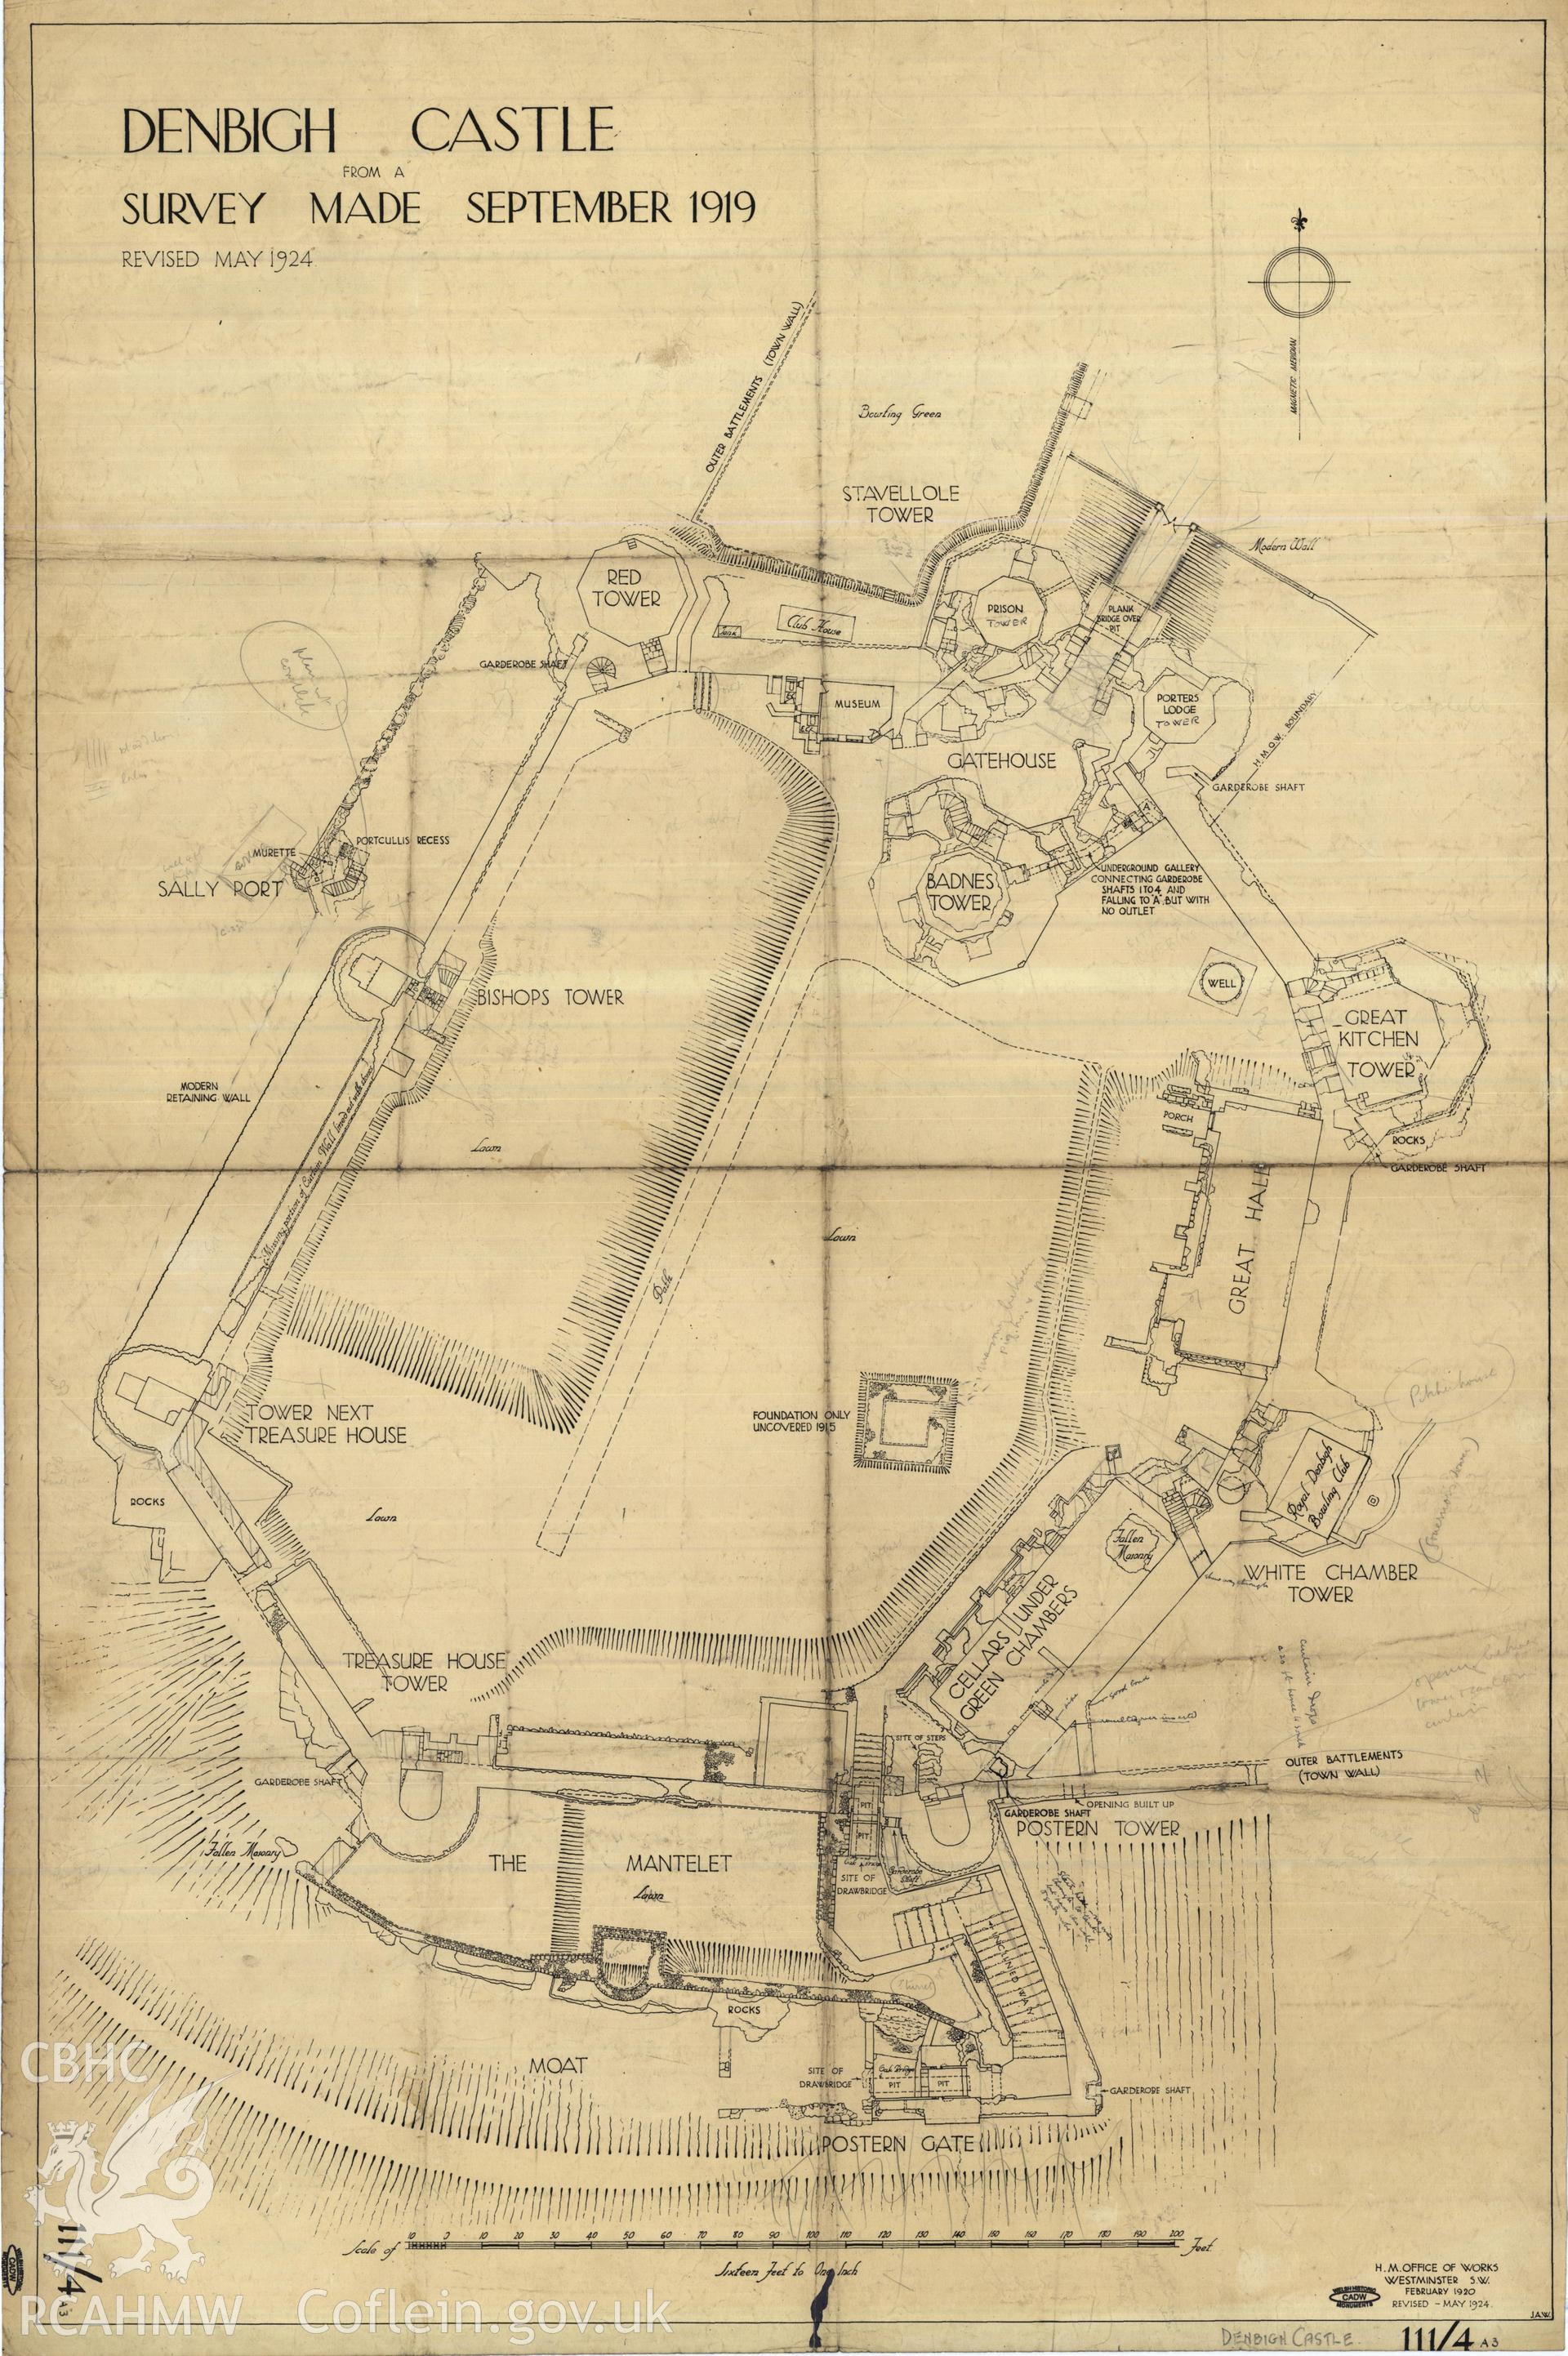 Cadw guardianship monument drawing of Denbigh Castle. General plan with notes. Cadw Ref. No:111/4A3. Scale 1:192.